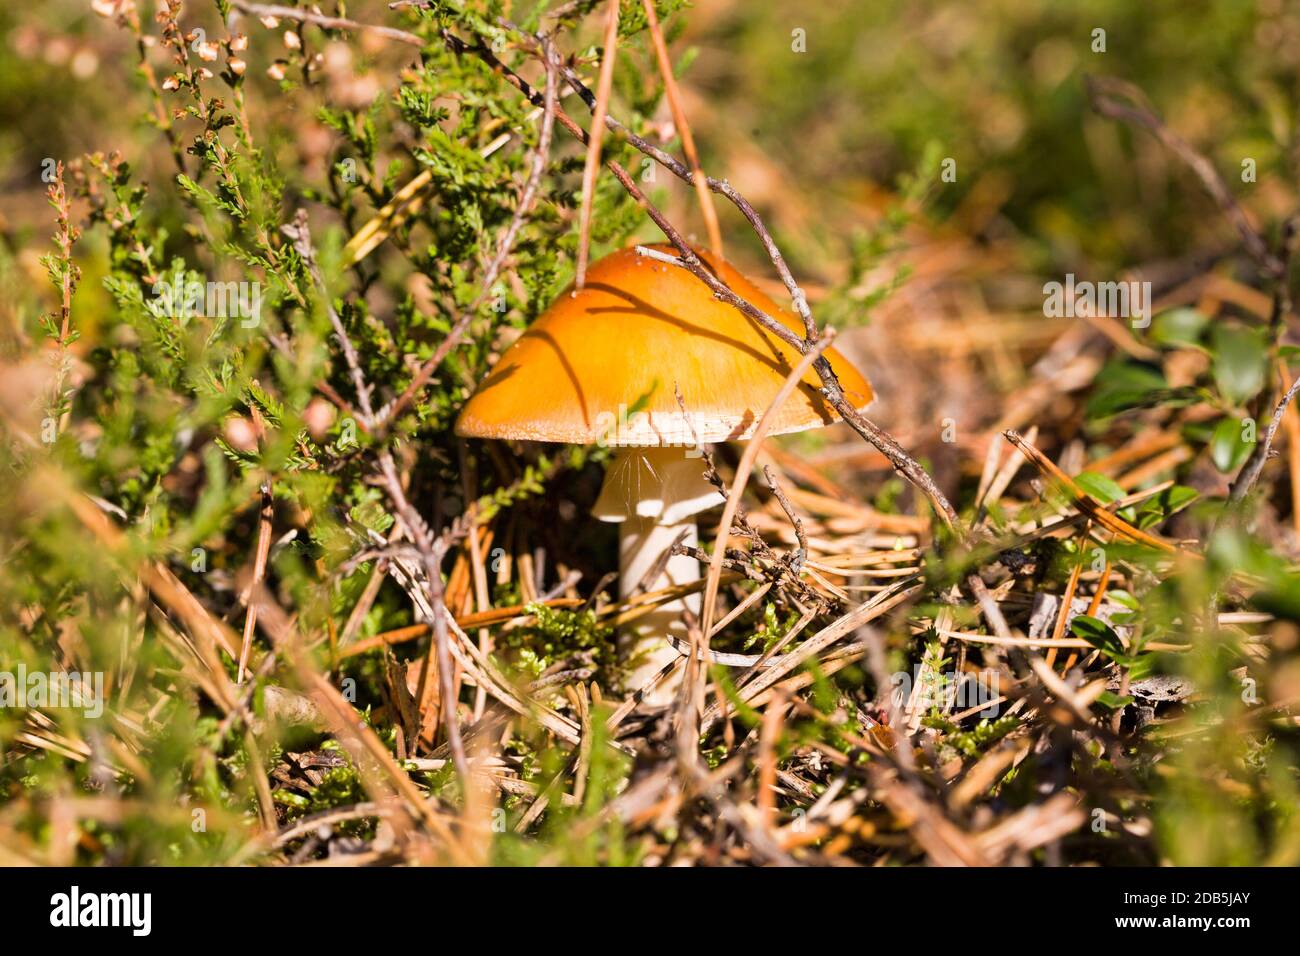 dangerous to humans wild poisonous mushrooms that grow in the forest, close-up on the wild Stock Photo